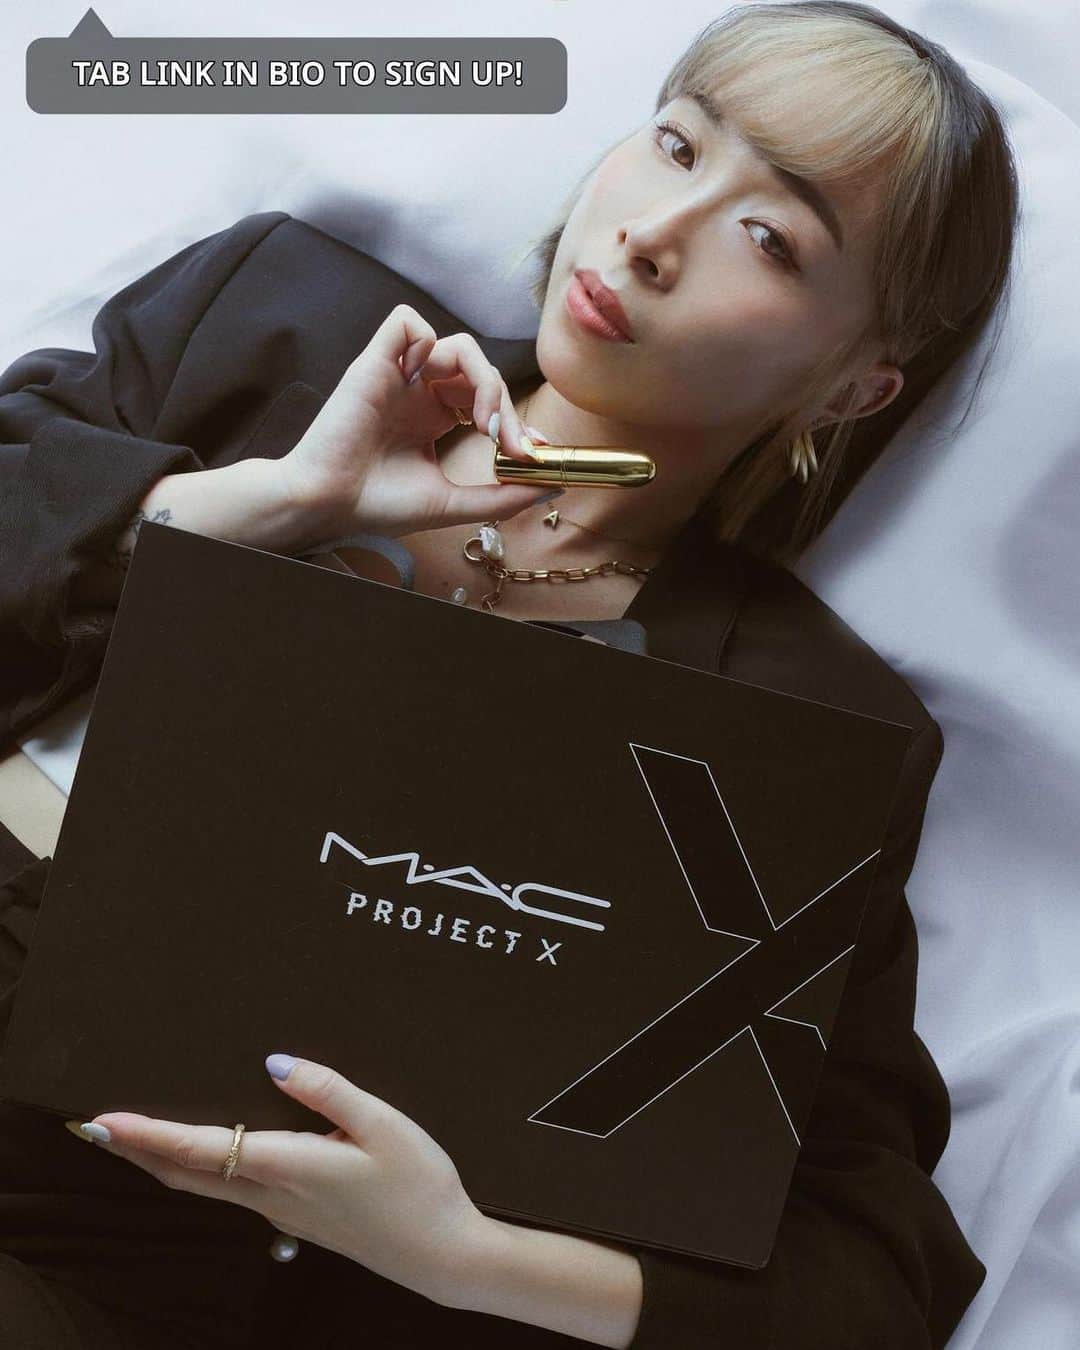 M·A·C Cosmetics Hong Kongさんのインスタグラム写真 - (M·A·C Cosmetics Hong KongInstagram)「必定引起全城哄動嘅IG人氣打卡色調！ M·A·C MAKER #金管子彈唇膏 @LAMUQE_MAGICUP ，來一杯霧感玉桂奶茶，和暖清新，一擦即現溫柔紅潤好氣色☀️ 即刻到Bio 連結登記，搶閘知道全港限定500件 𝙋𝙍𝙊𝙅𝙀𝘾𝙏 𝙓「小黑盒」嘅發售日期同資訊！ Product mentioned: M·A·C PROJECT X Vol.001 [Cult of Lips] - HK$450 #MACProjectX #7月哄動開箱 #MACHongKong Regram from @angelamiuz   Grab it before it’s gone💋 M·A·C MAKER @LAMUQE_MAGICUP 👉🏻Most Instagram-able lip color‼️ The soft matte rosy coral hue looks beautiful on all skin tones that you’ll want to keep it in place for whole summer☀️ Get this MUST-HAVE Camera-ready shade in 𝙋𝙍𝙊𝙅𝙀𝘾𝙏 𝙓 by registering from link in bio NOW!」7月8日 19時39分 - maccosmeticshk